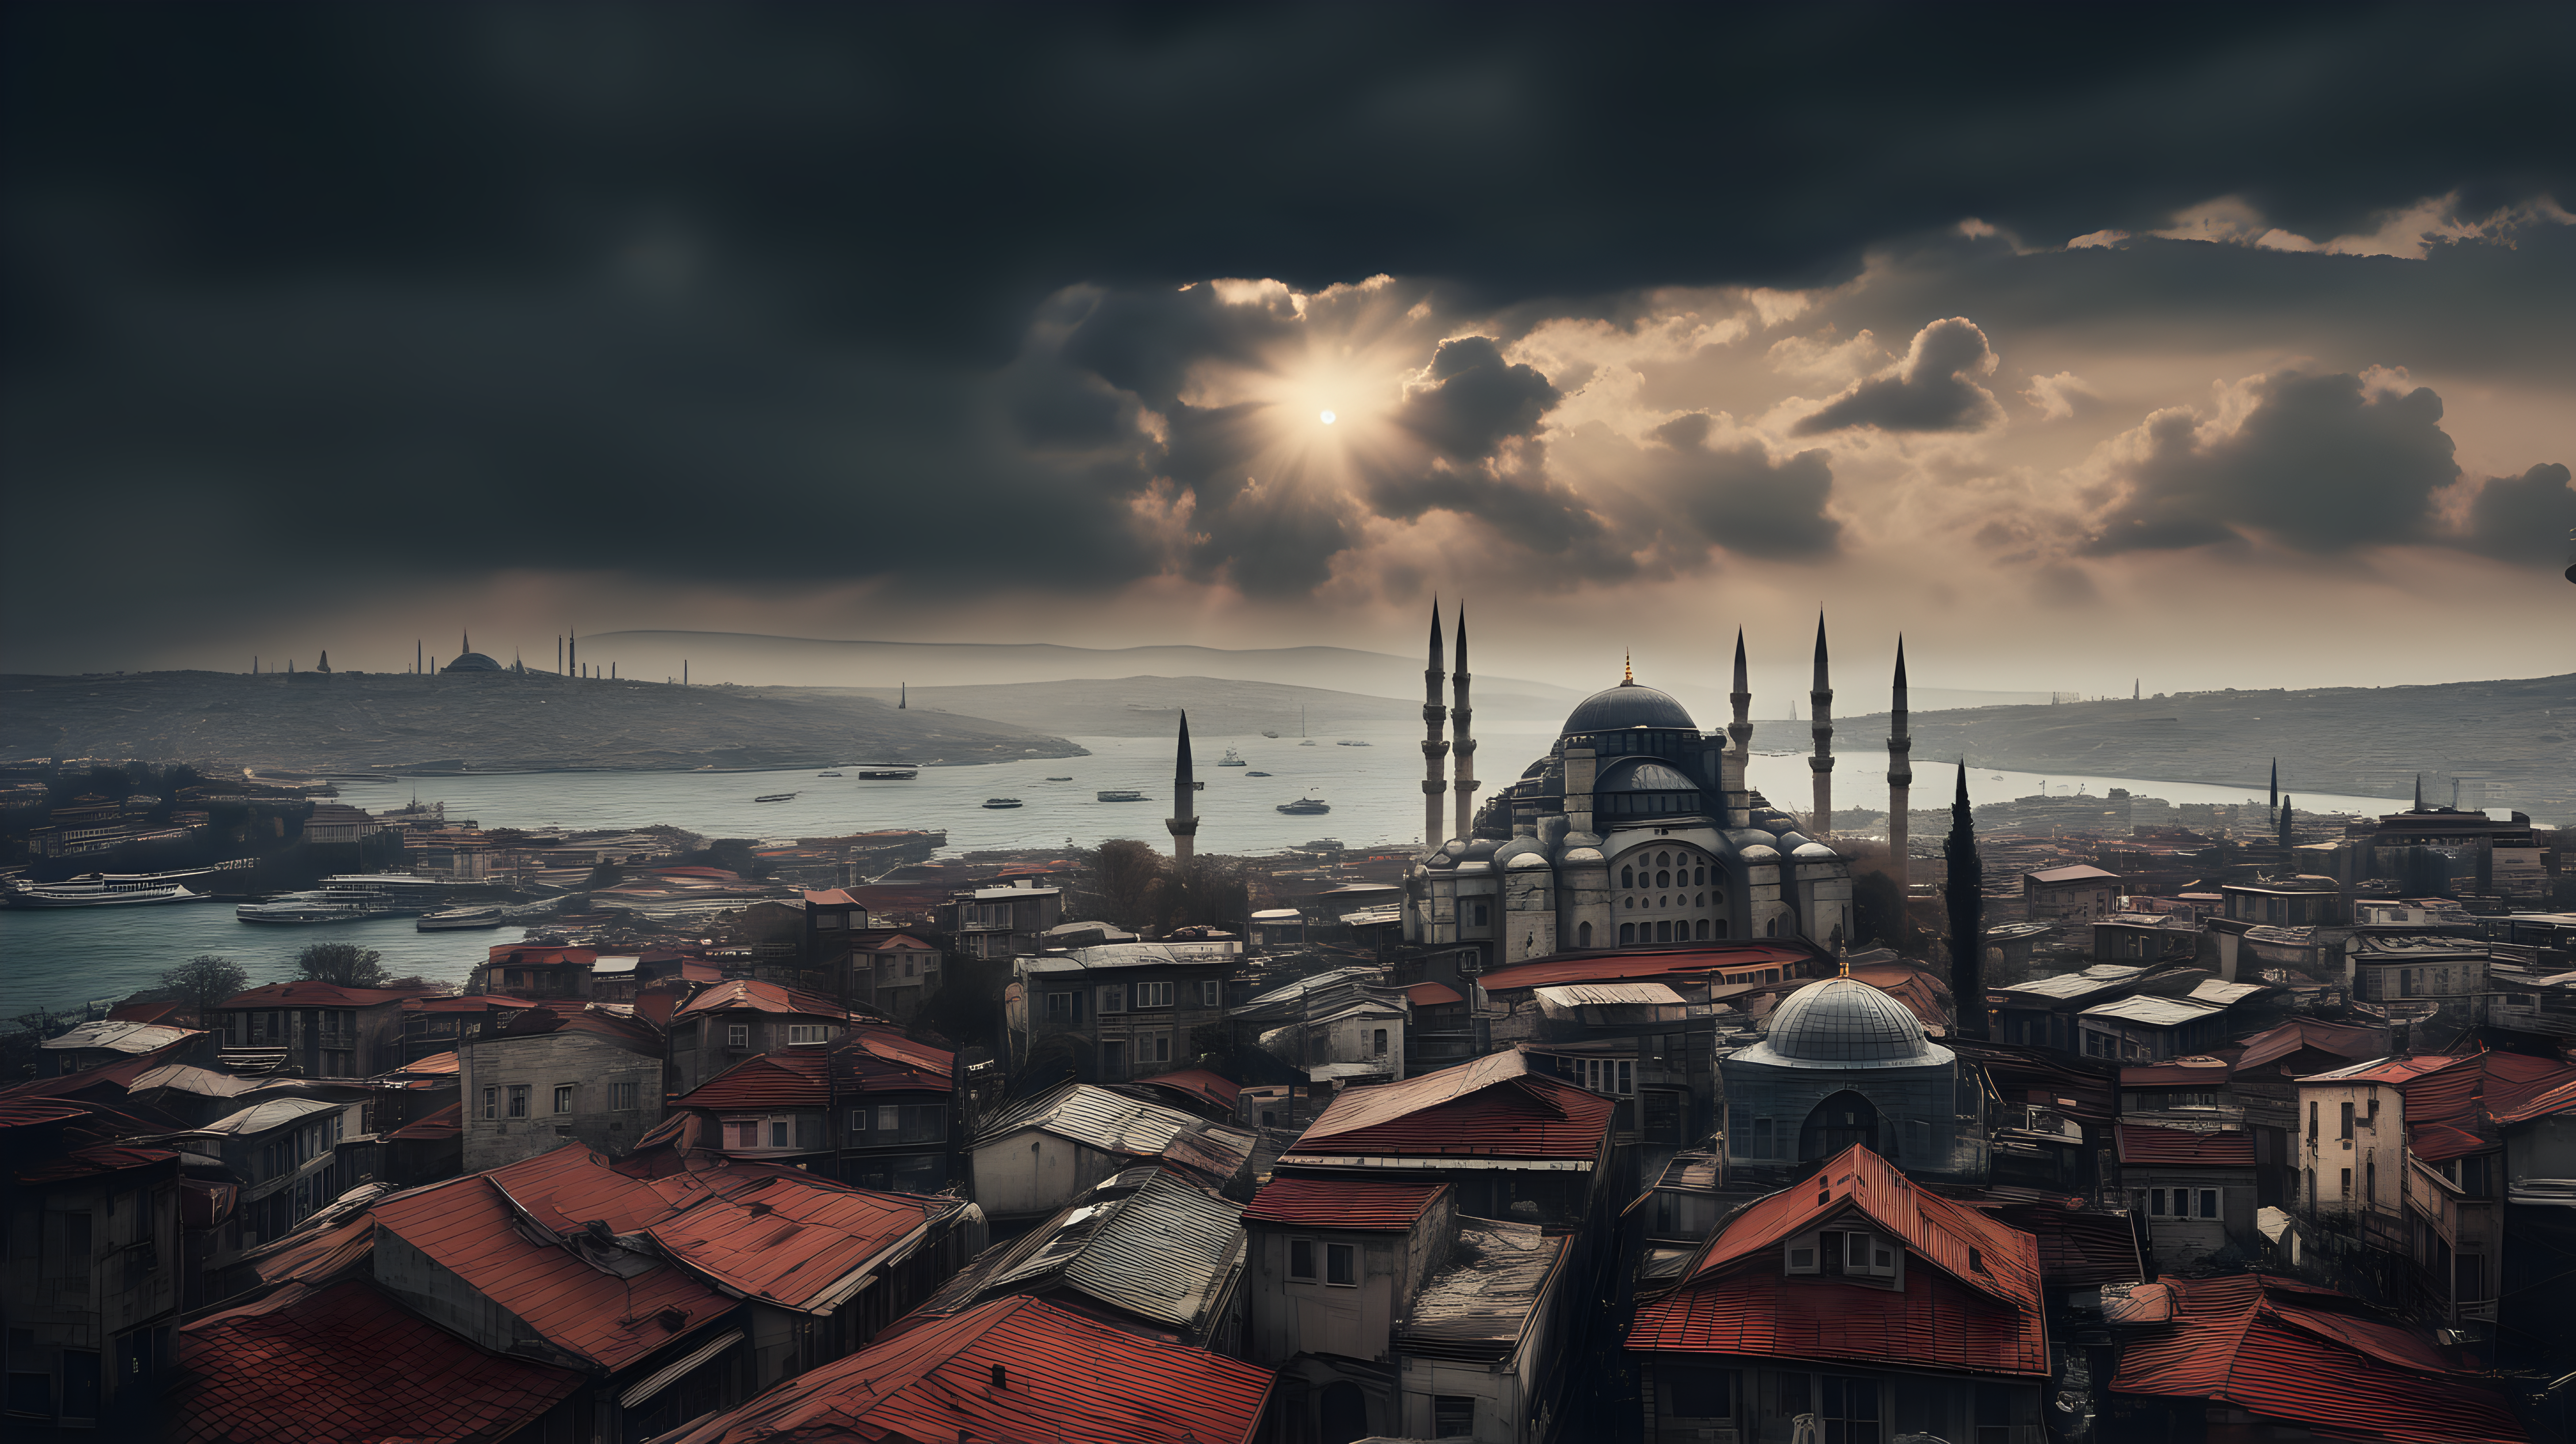 /imagine prompt: Historic Cityscapes, Istanbul, Turkey, year 1500, east roman empire age with its ancient roman structures –v 5.2and the overall moody atmosphere. Use a high-resolution 16k camera with a 16:9 aspect ratio, a raw style, and a quality setting of 2 to capture this atmospheric scene. –ar 16:9 –v 5.2 –style raw